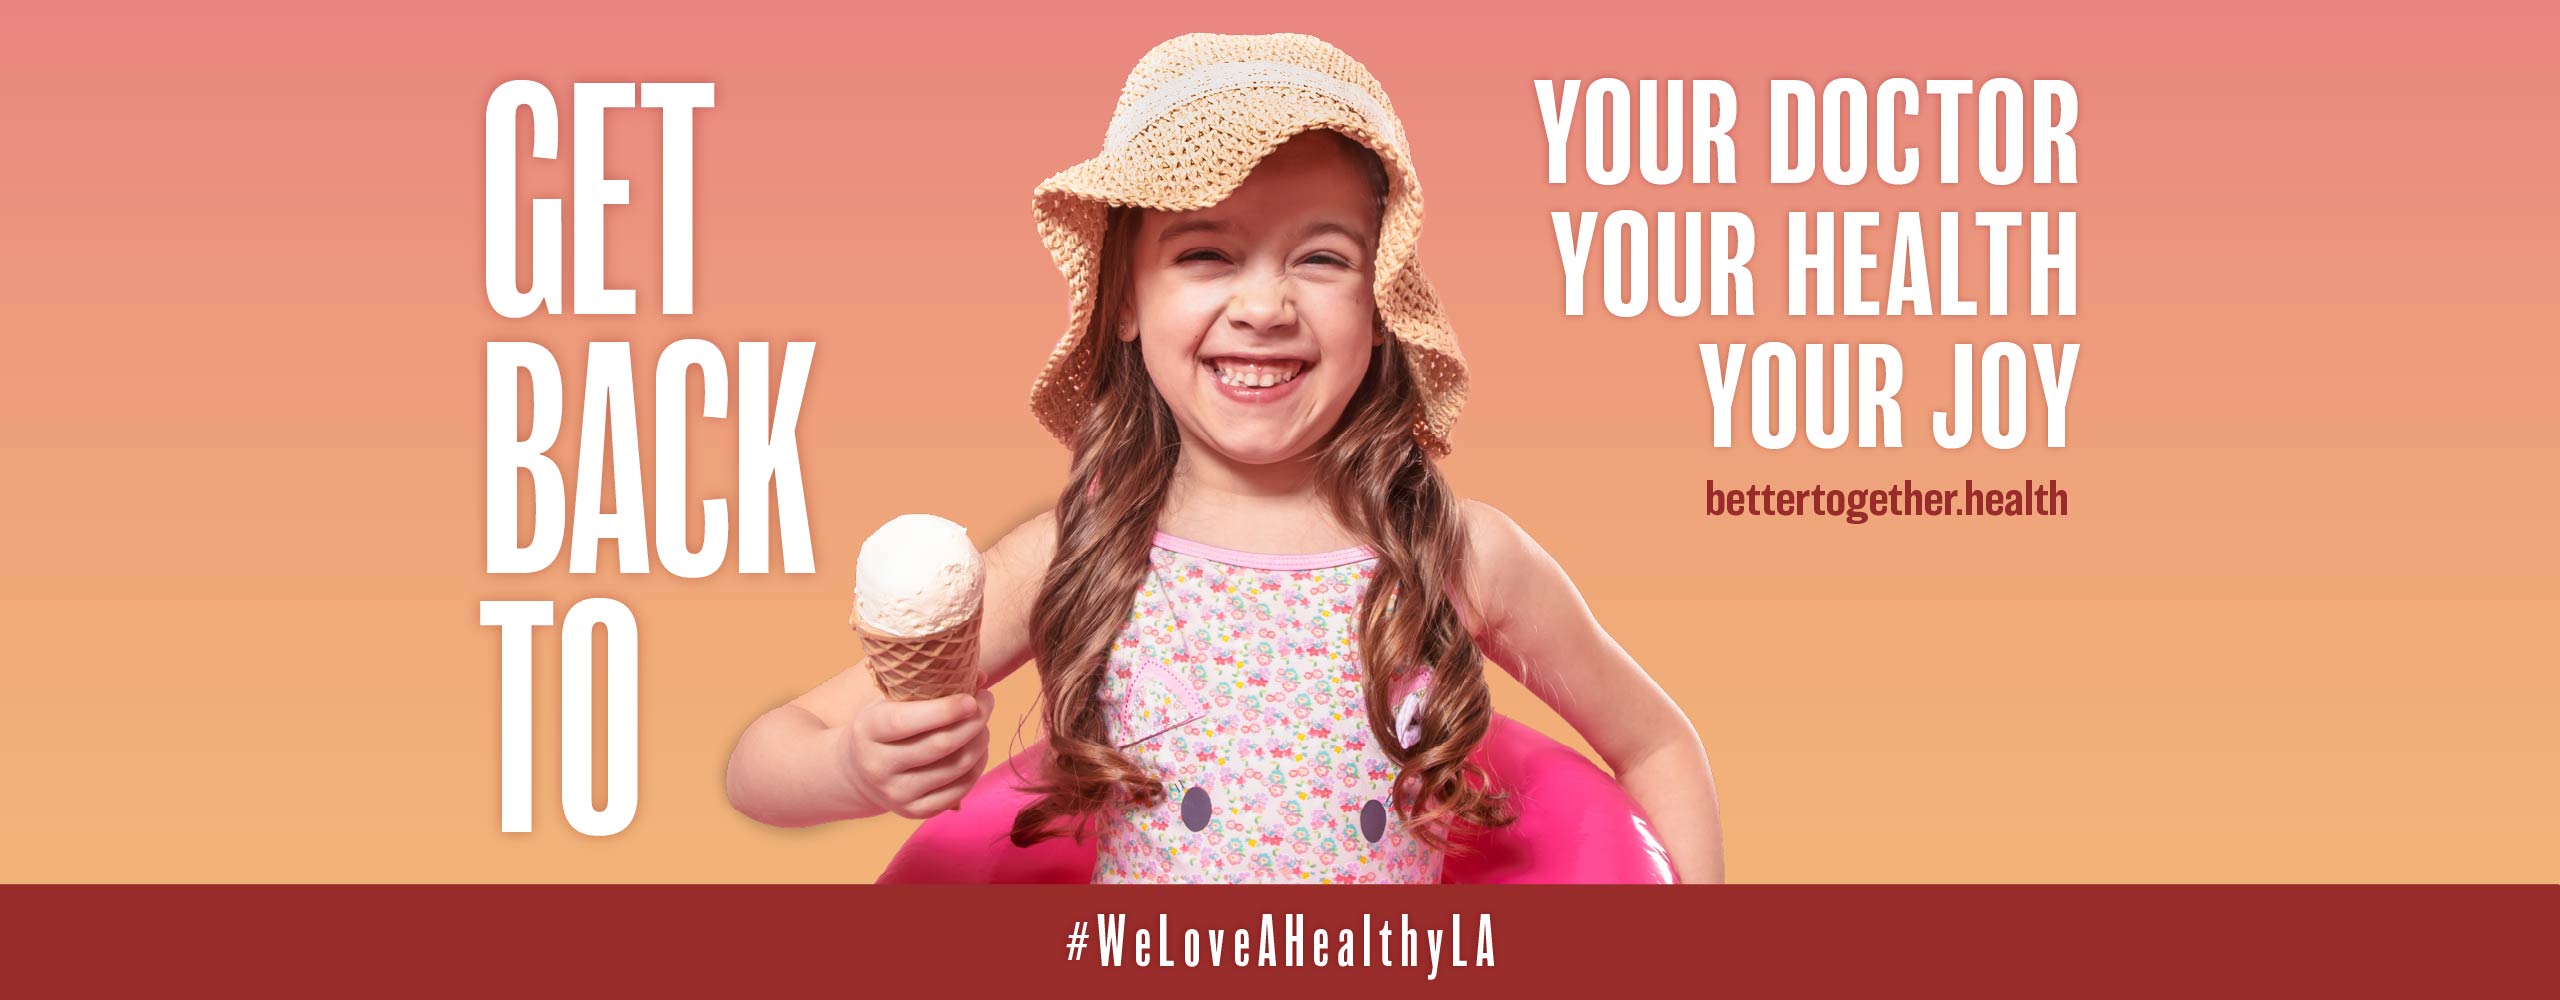 Words: Get Back to your doctor, your health, your joy. Young girl wearing swimsuit, smiling, holding ice cream cone - #WeLoveAHealthyLA